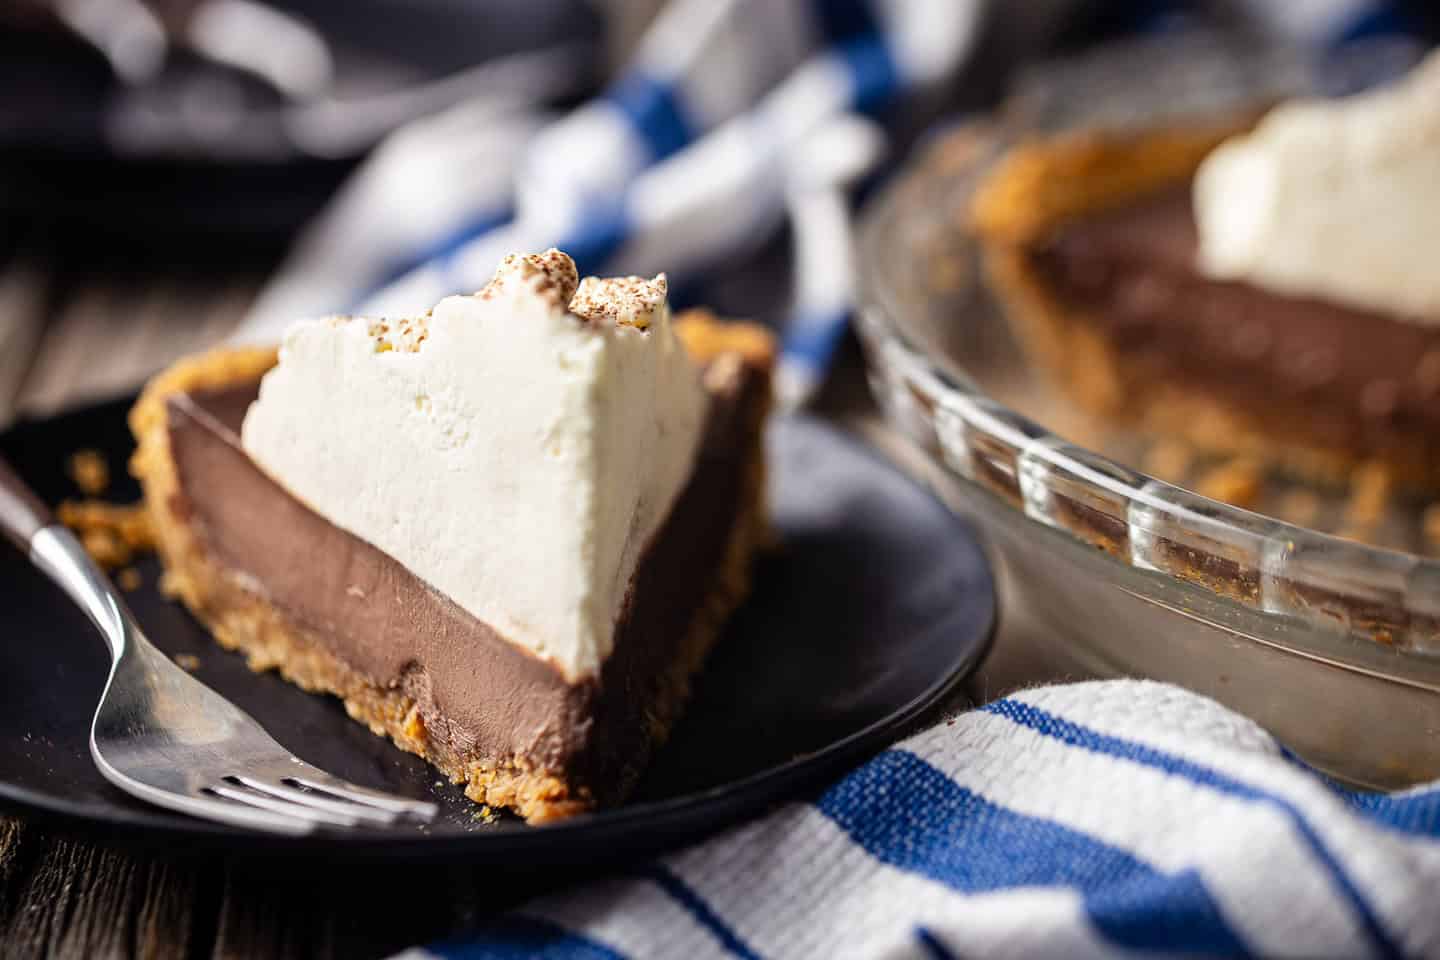 Chocolate pudding pie with Graham cracker crust, sliced and served on a dark blue plate.